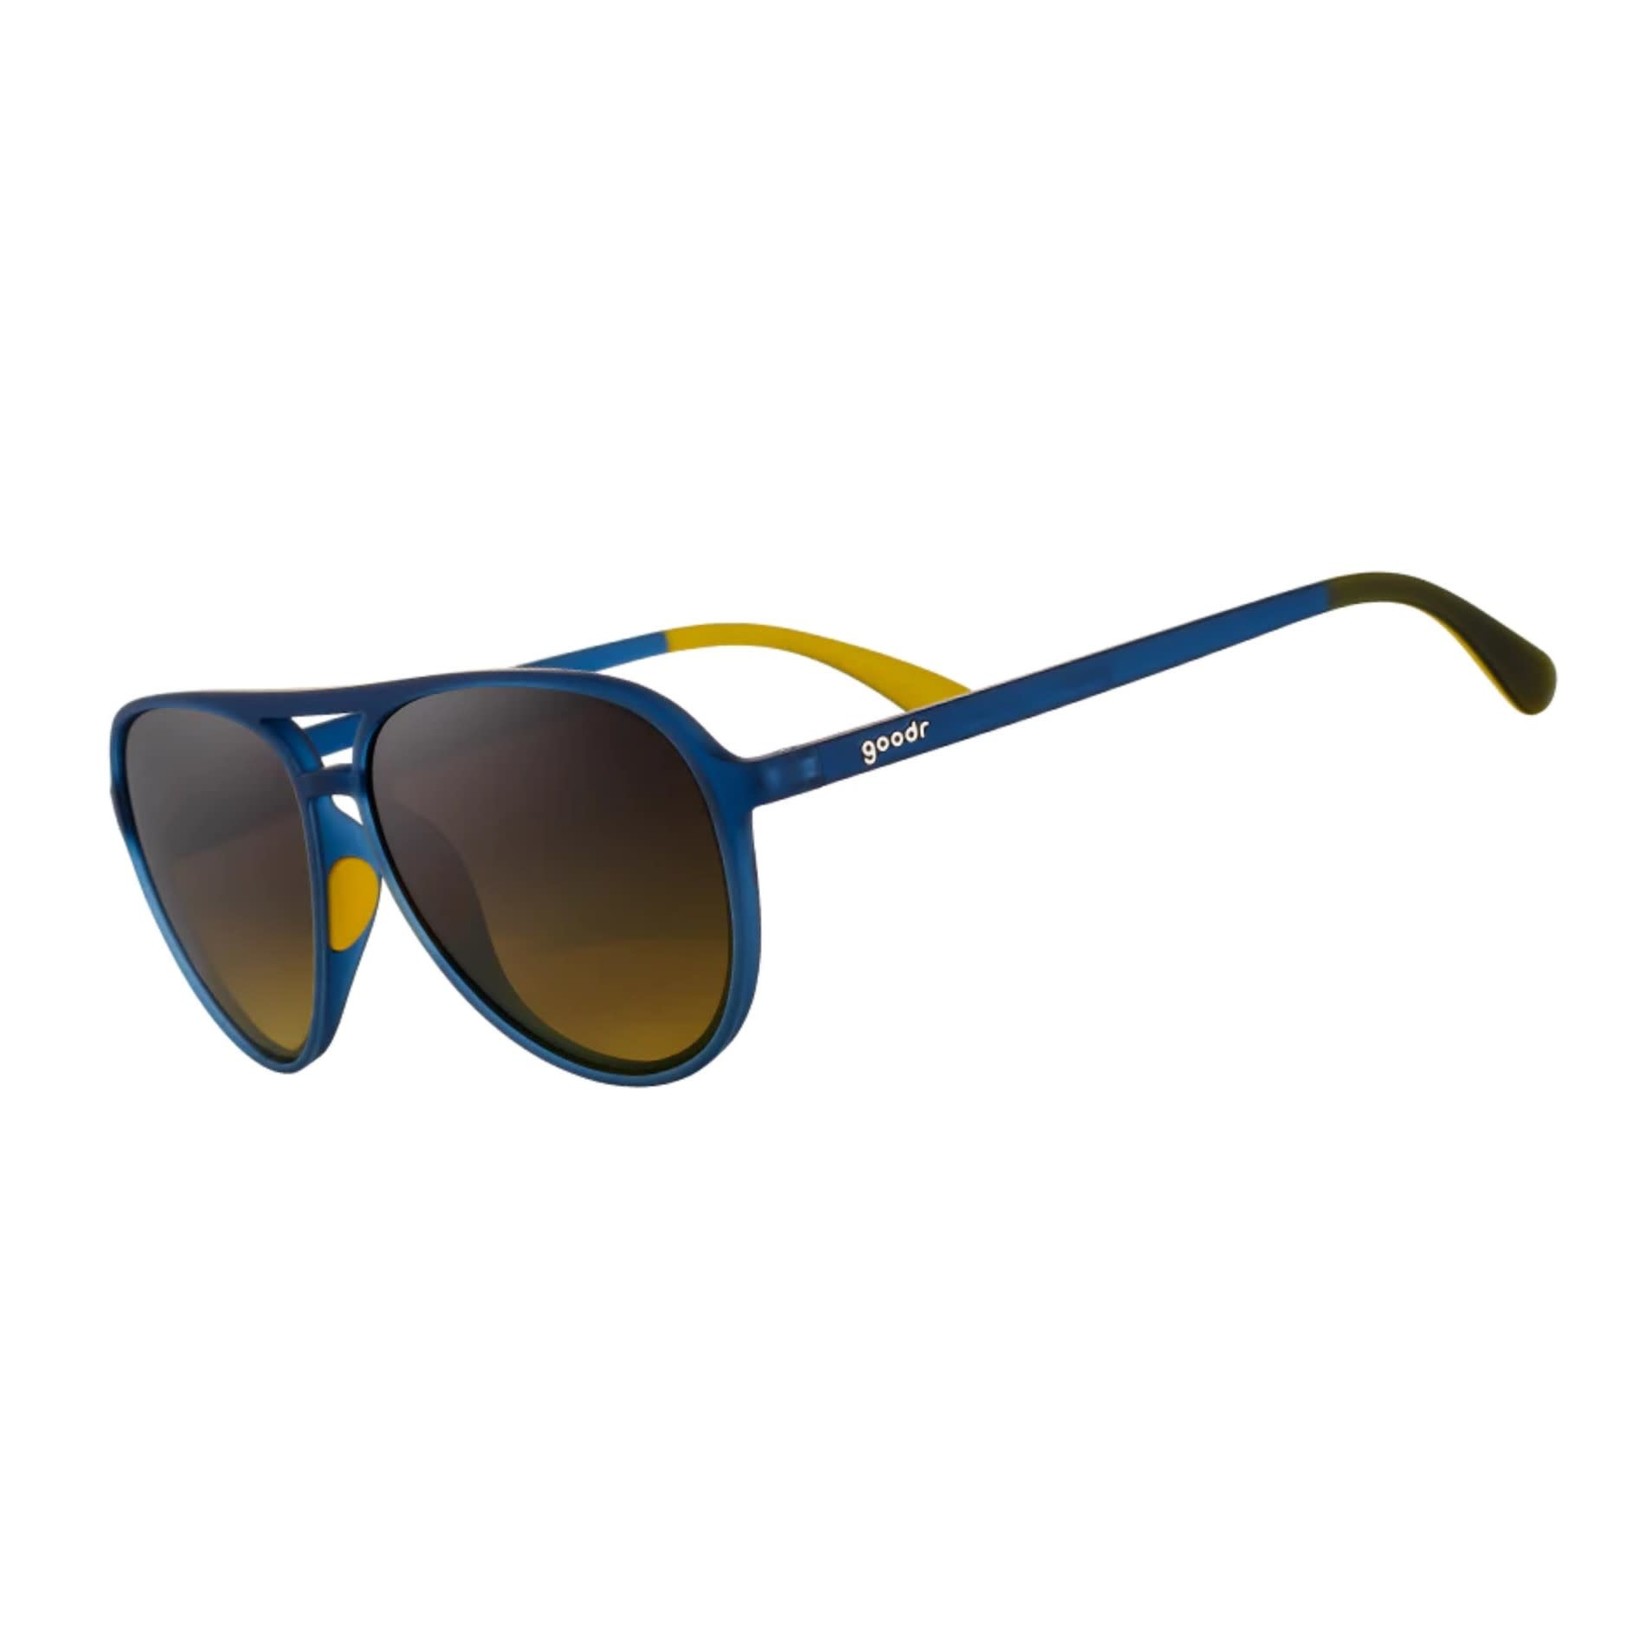 Goodr Goodr  "Frequent Skymall Shoppers" Sunglasses